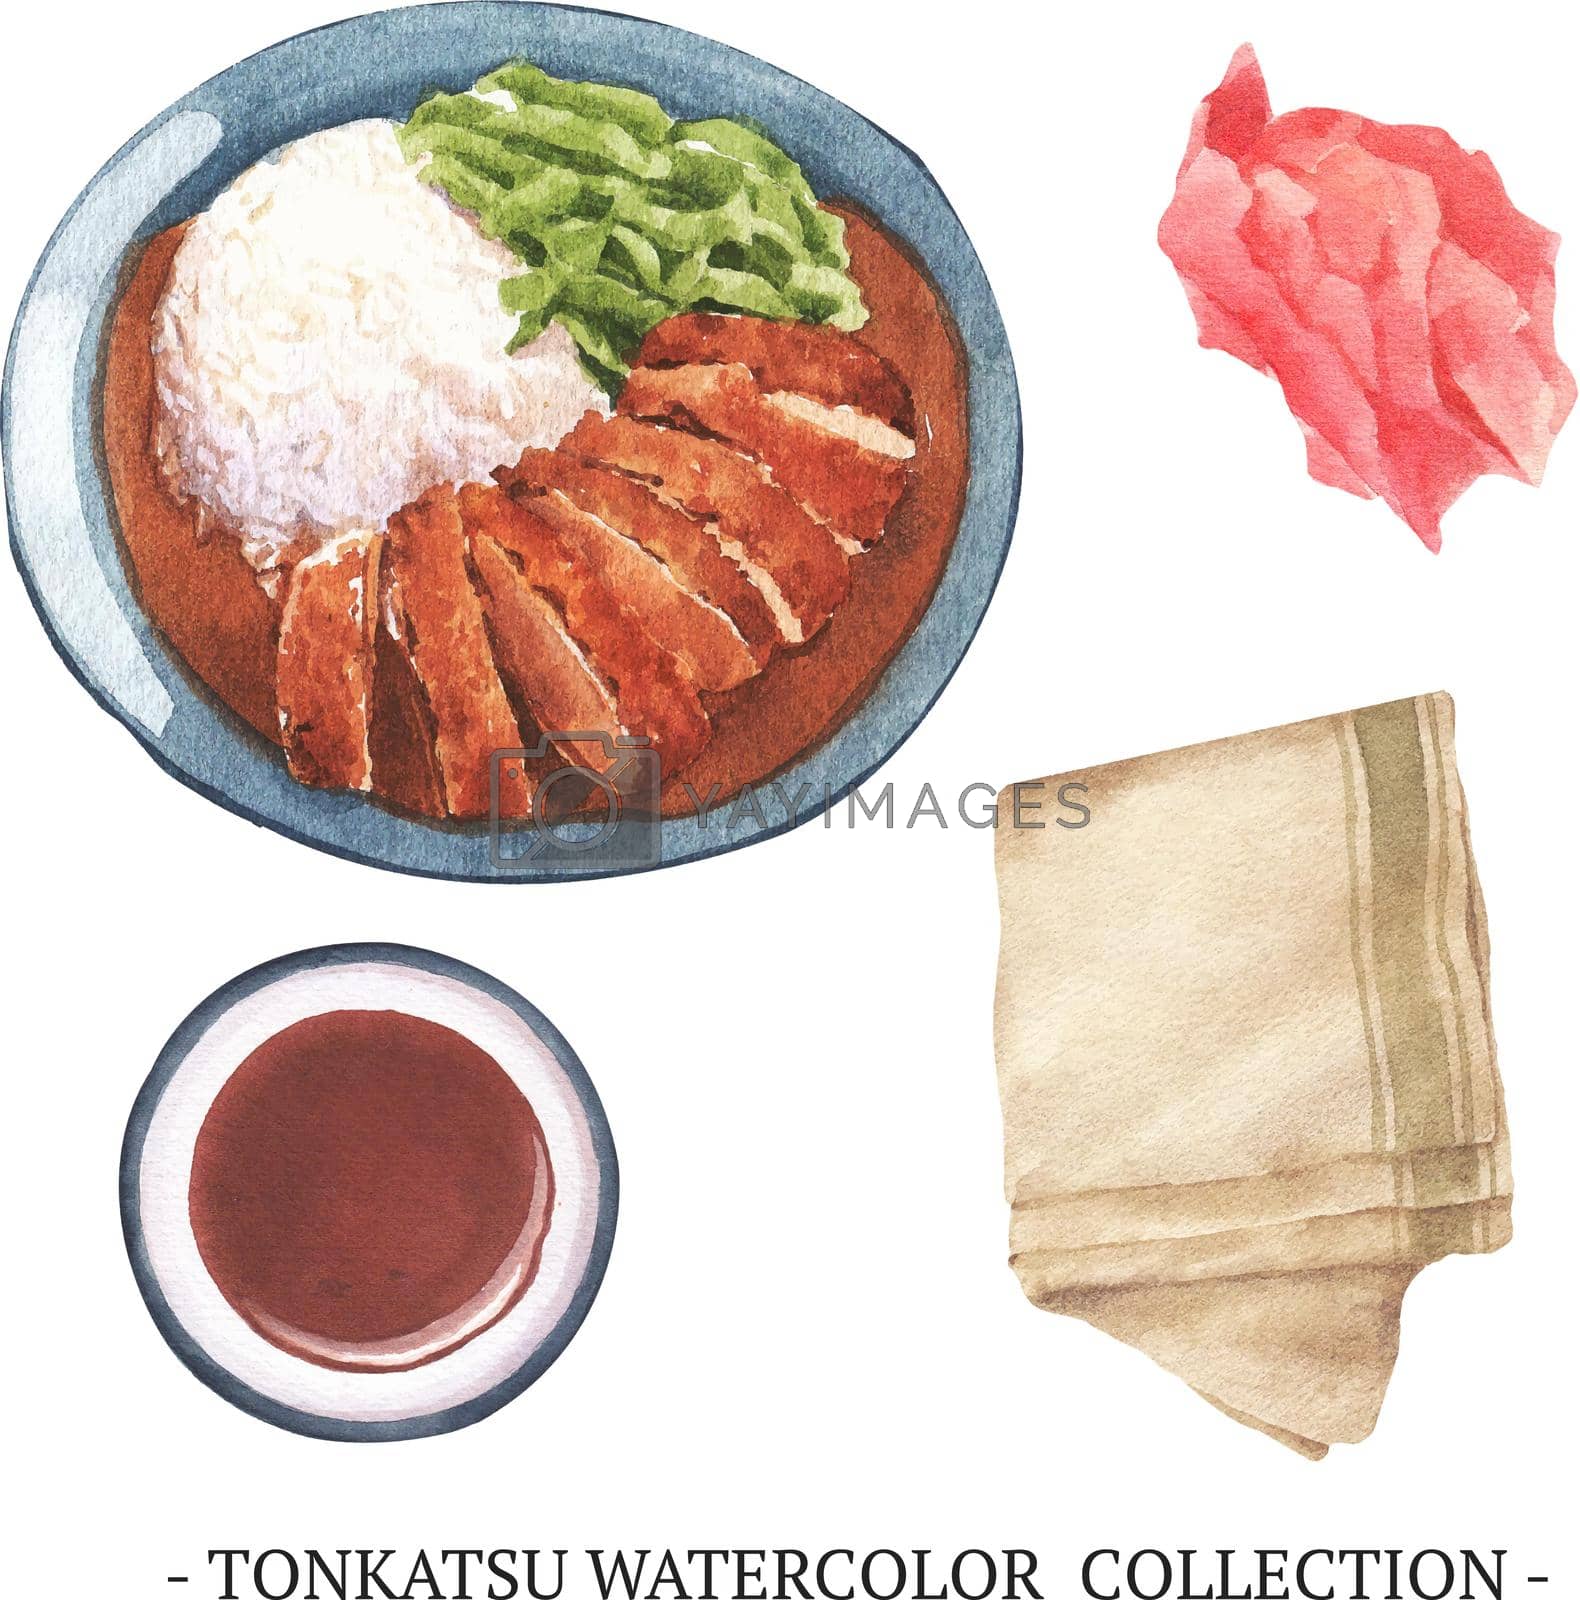 Royalty free image of Creative isolated watercolor sushi illustration on white background. by Photographeeasia